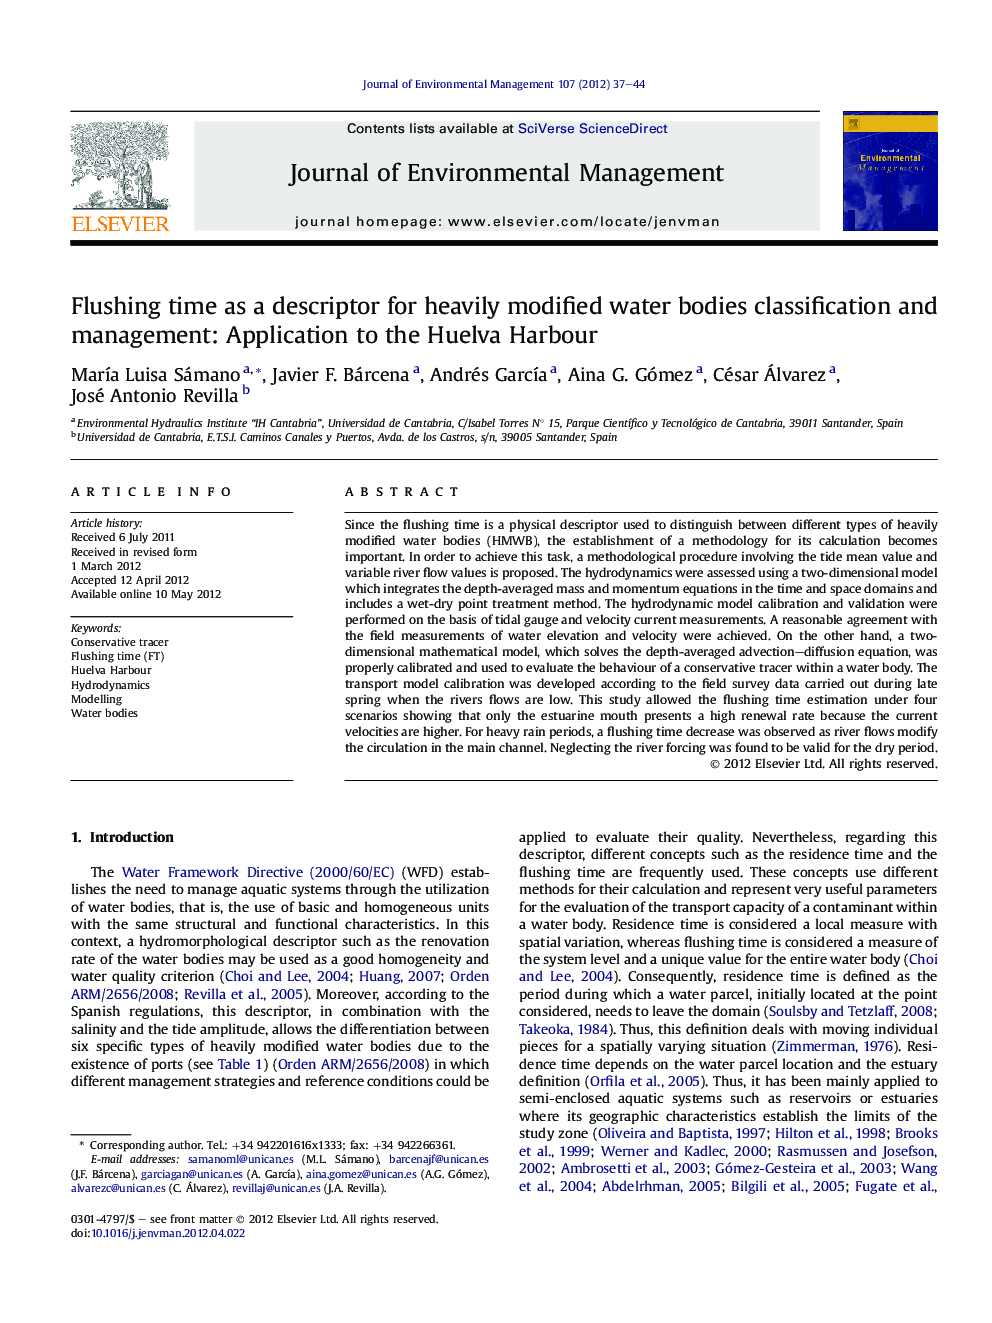 Flushing time as a descriptor for heavily modified water bodies classification and management: Application to the Huelva Harbour